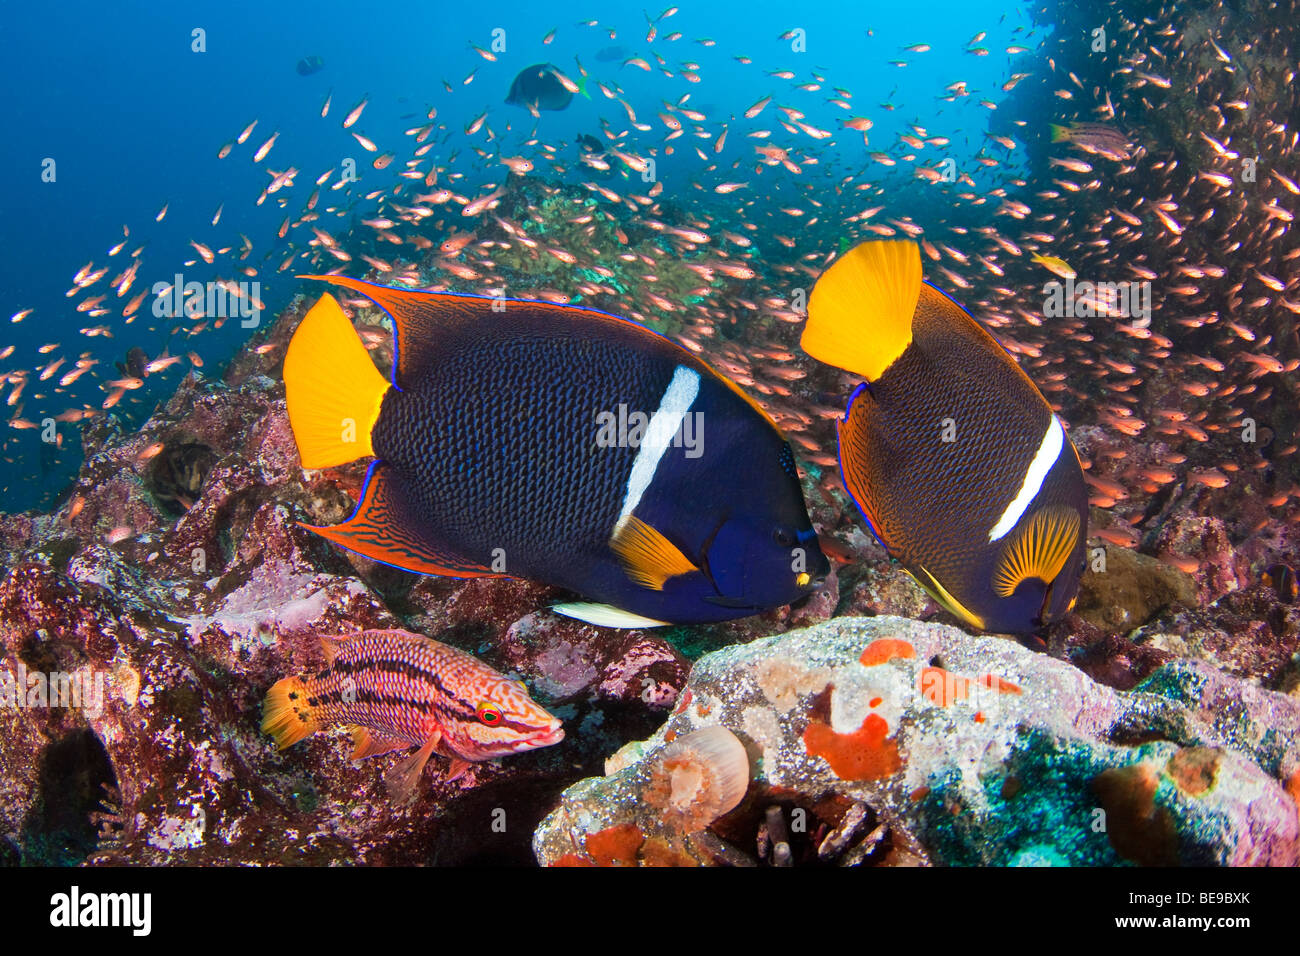 A reef scene king angelfish, Holacanthus passer, and a Mexican hogfish adult female phase, Bodianus diplotaenia, Galapagos. Stock Photo